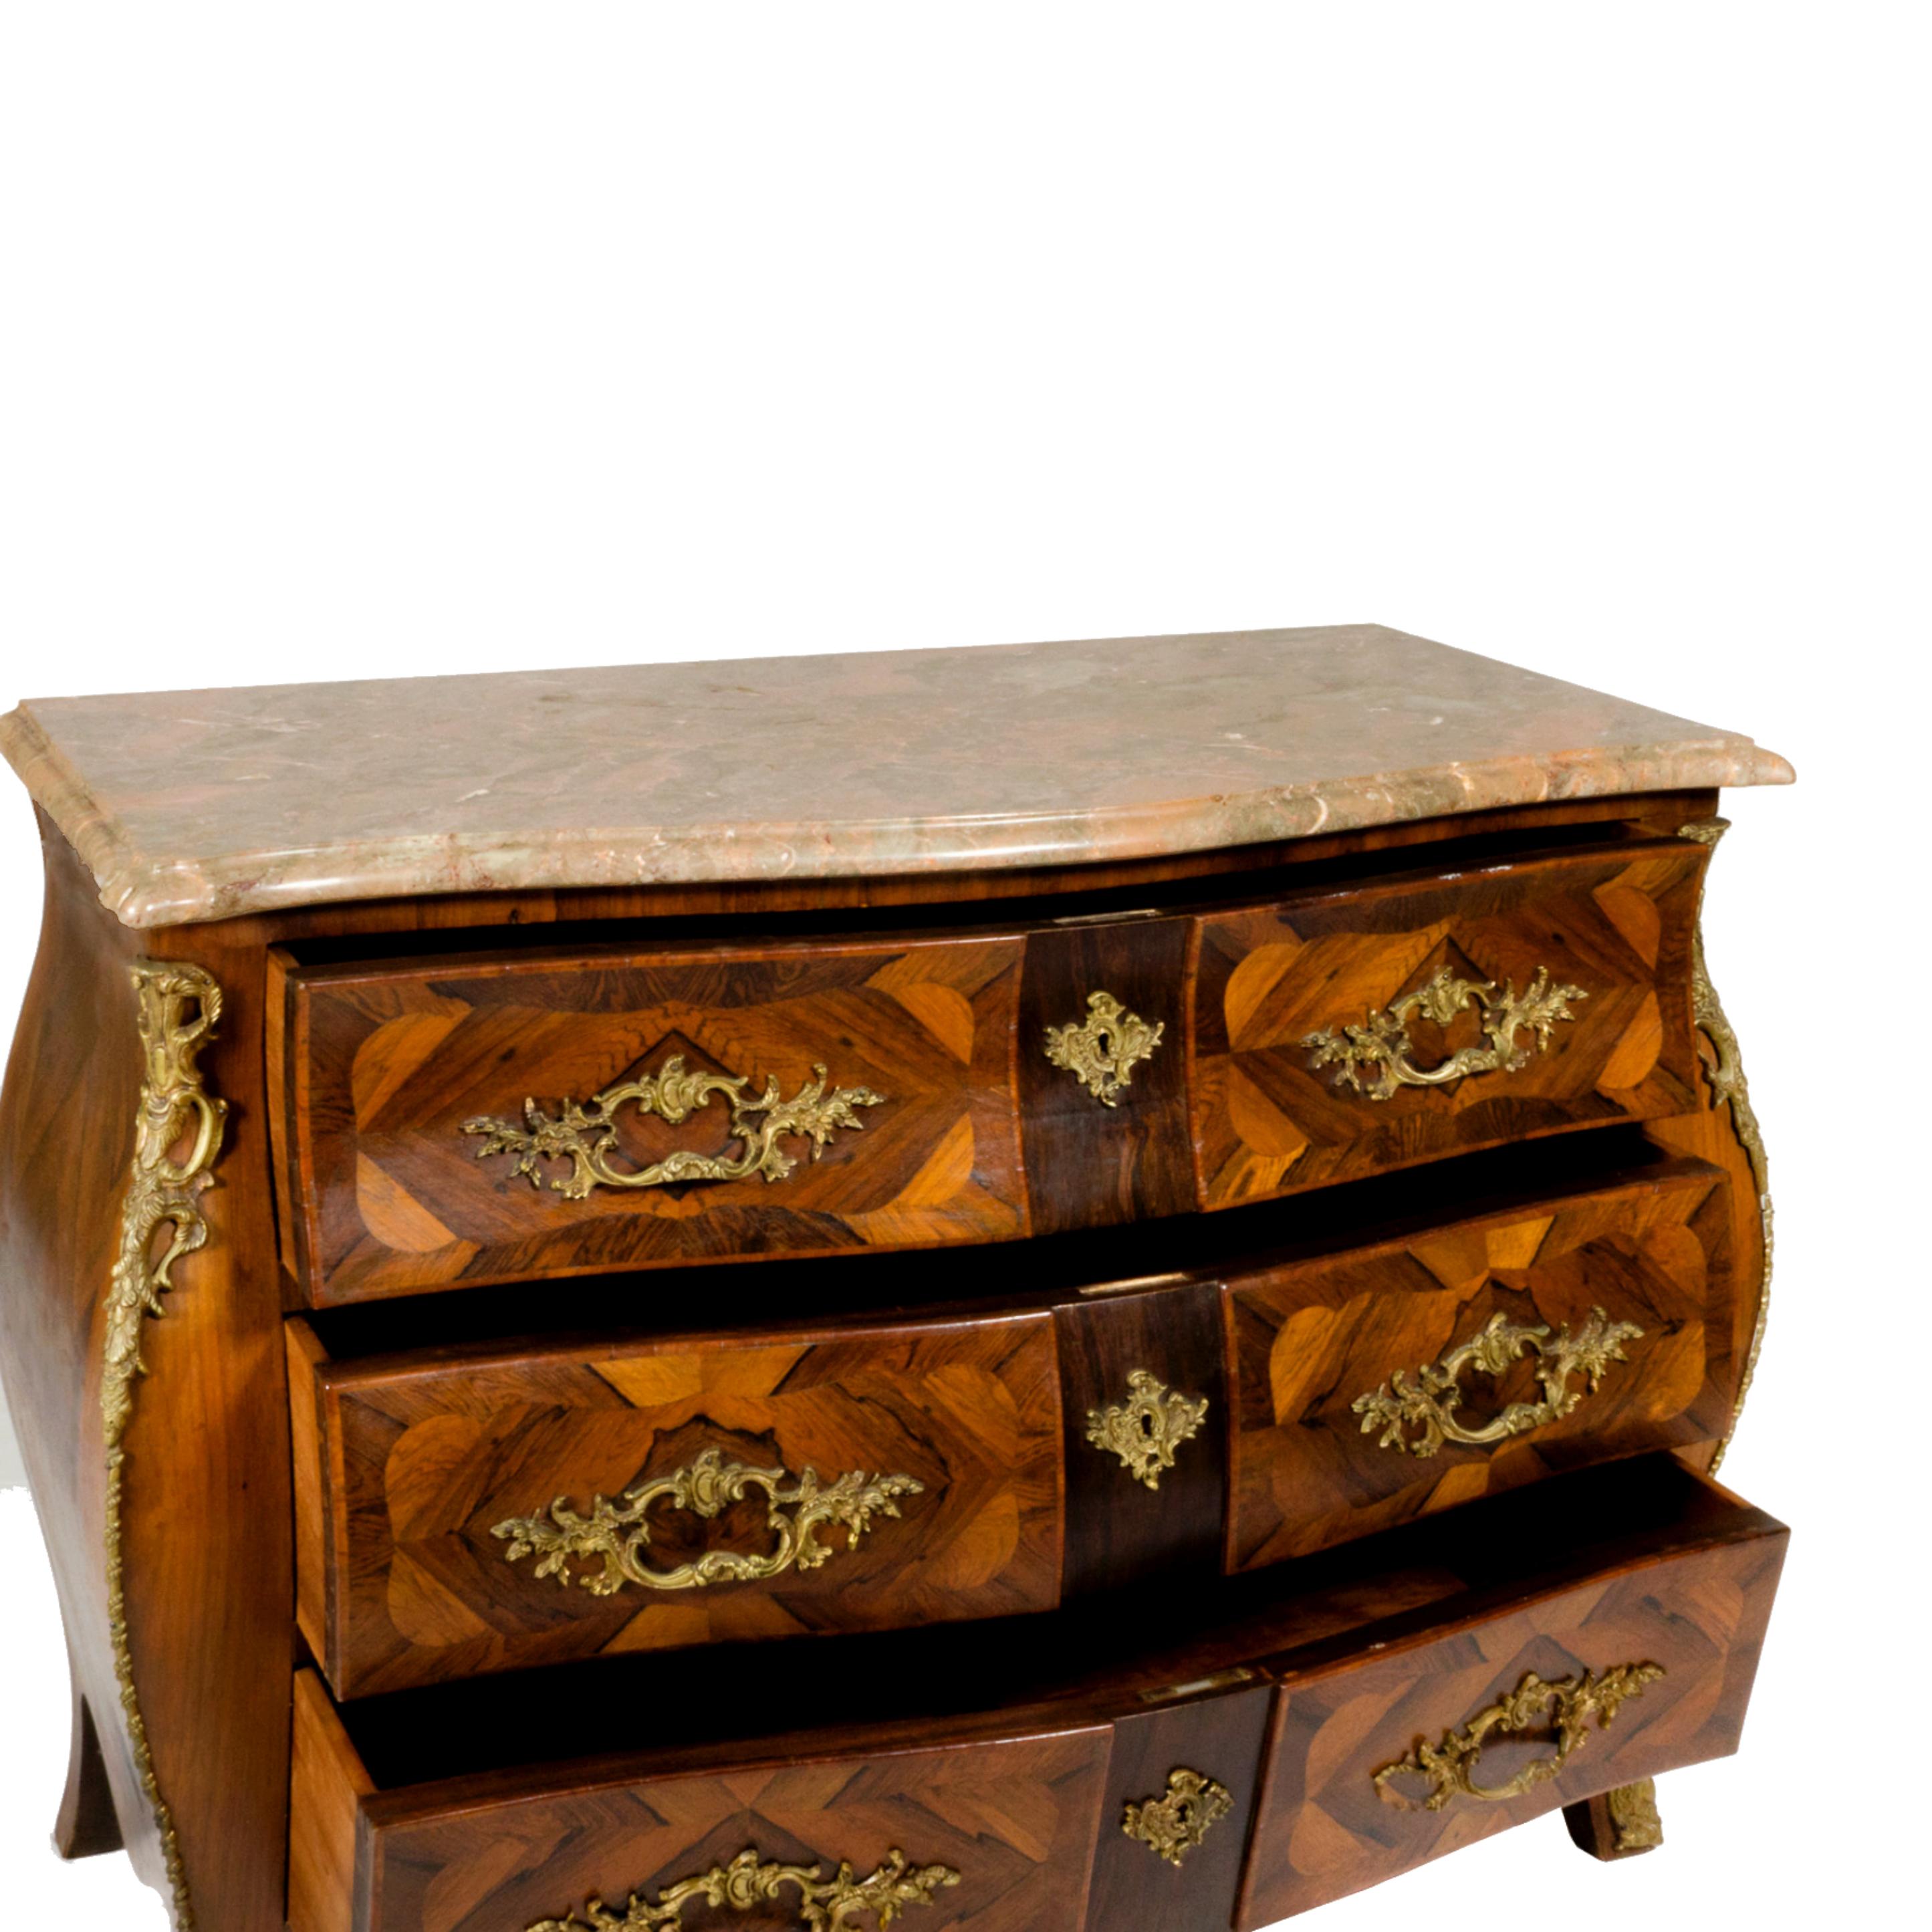 This beautiful chest is designed in the elegant French Louis XV style, featuring a stunning marble top with intricate marquetry inlay and bronze hardware. The top is gracefully shaped with beveled edges, and the chest has three spacious drawers that